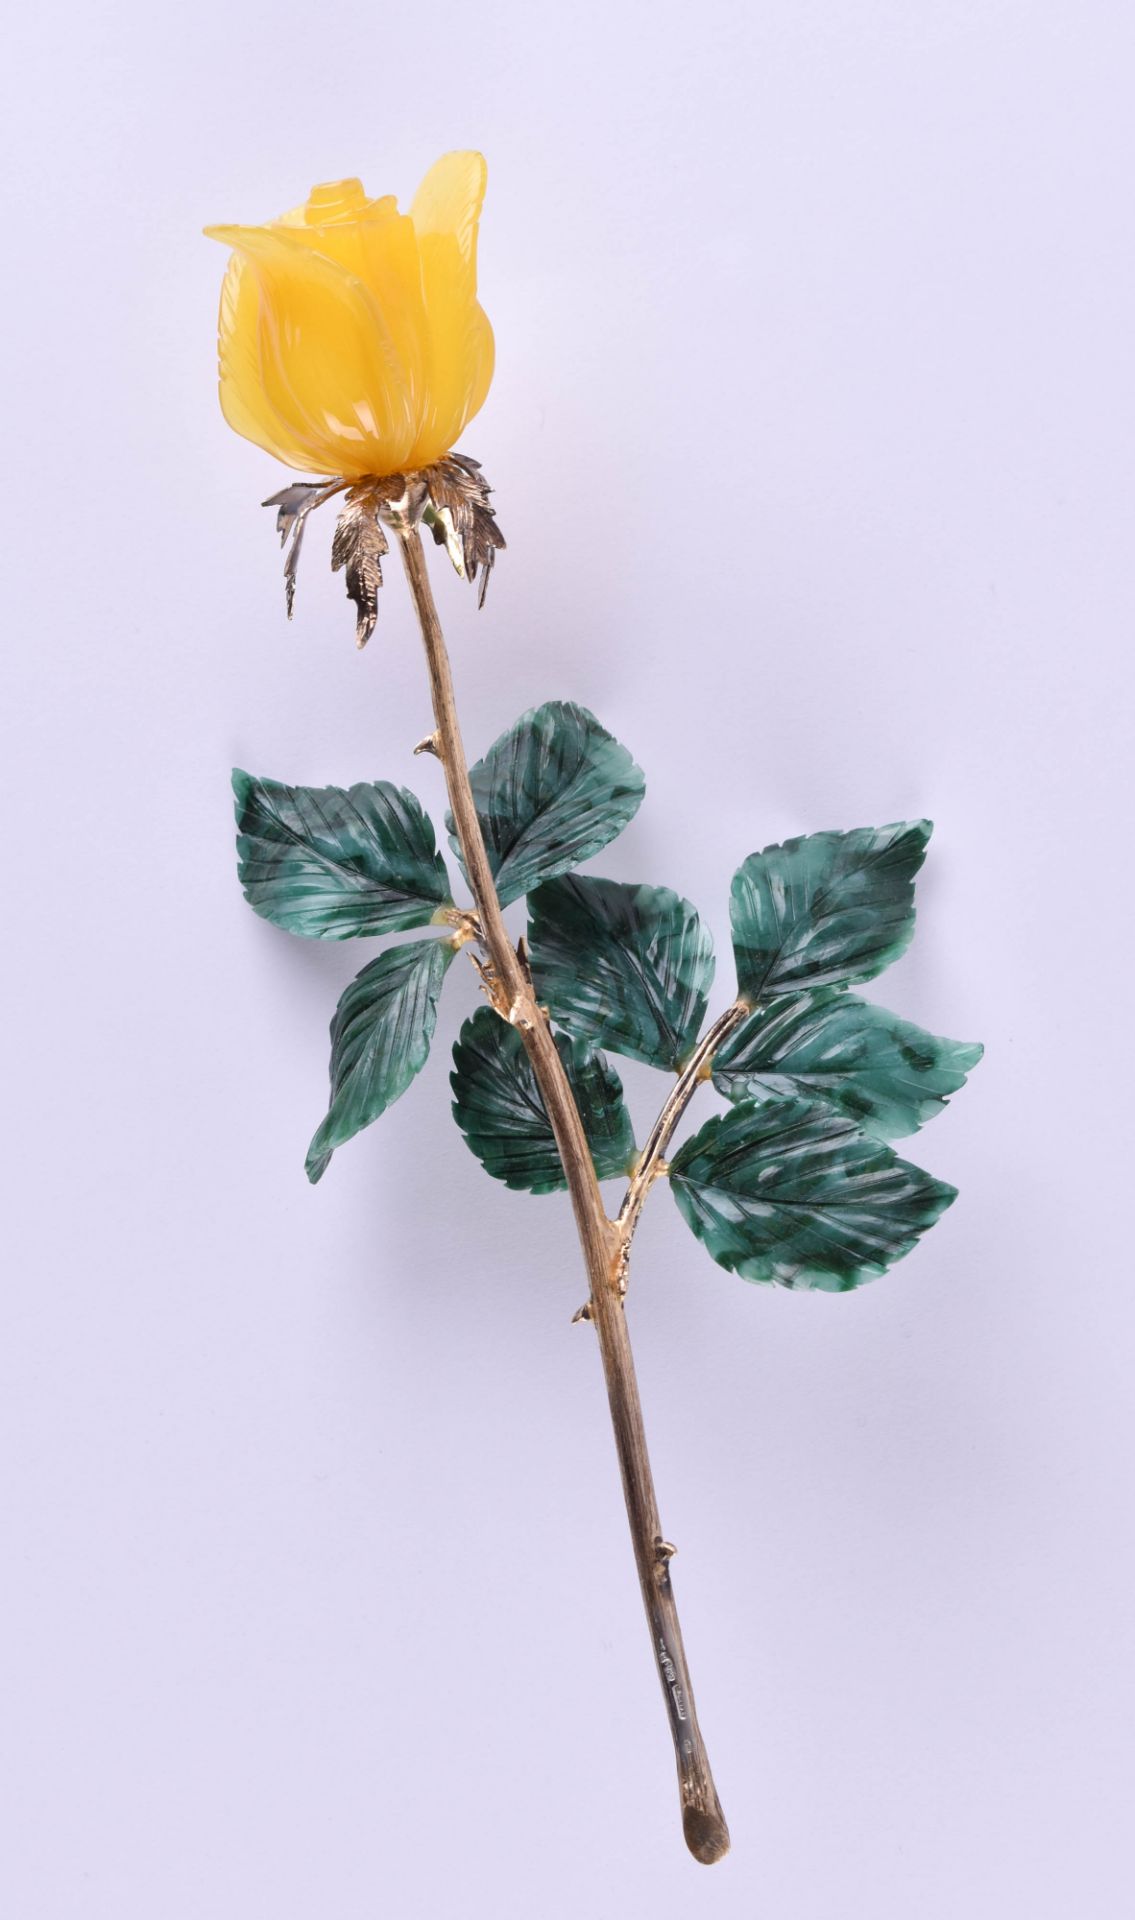 Rose Russiastalk silver gilded 88 Zolotnik, leaves made of nephrite jade, flower probably made of